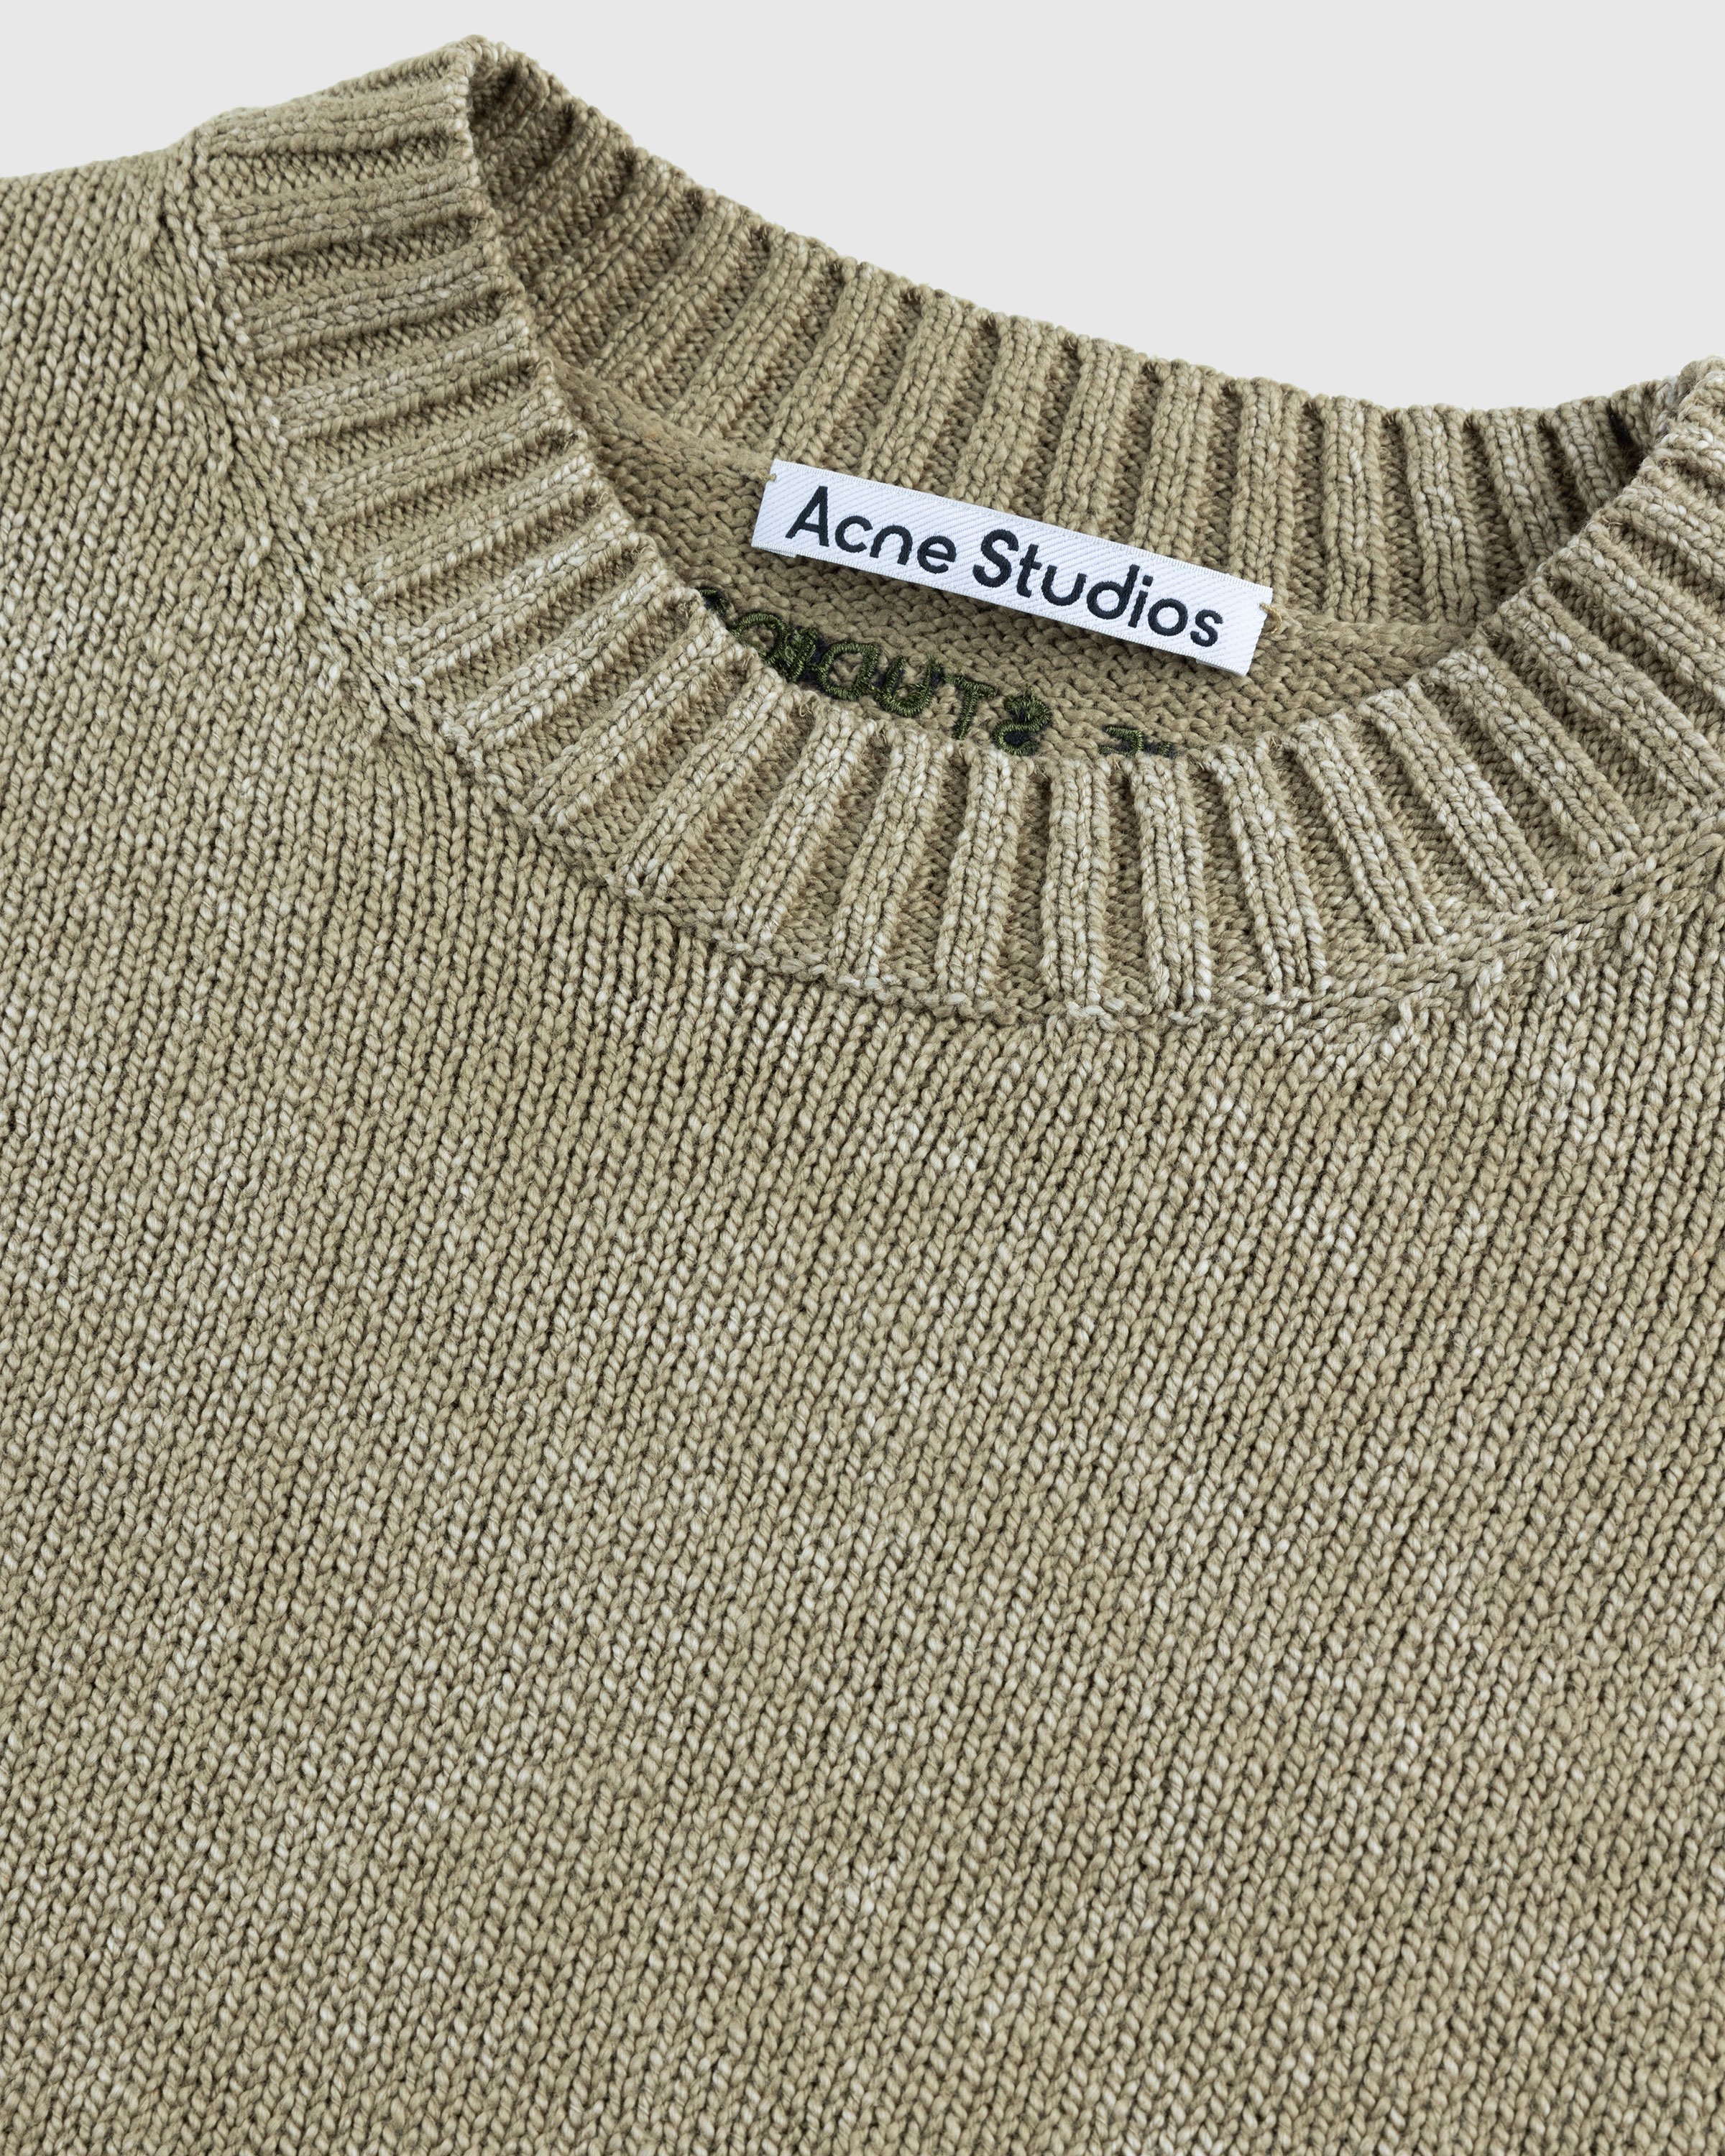 Acne Studios - FN-MN-KNIT000443 Olive Green - Clothing - Green - Image 6